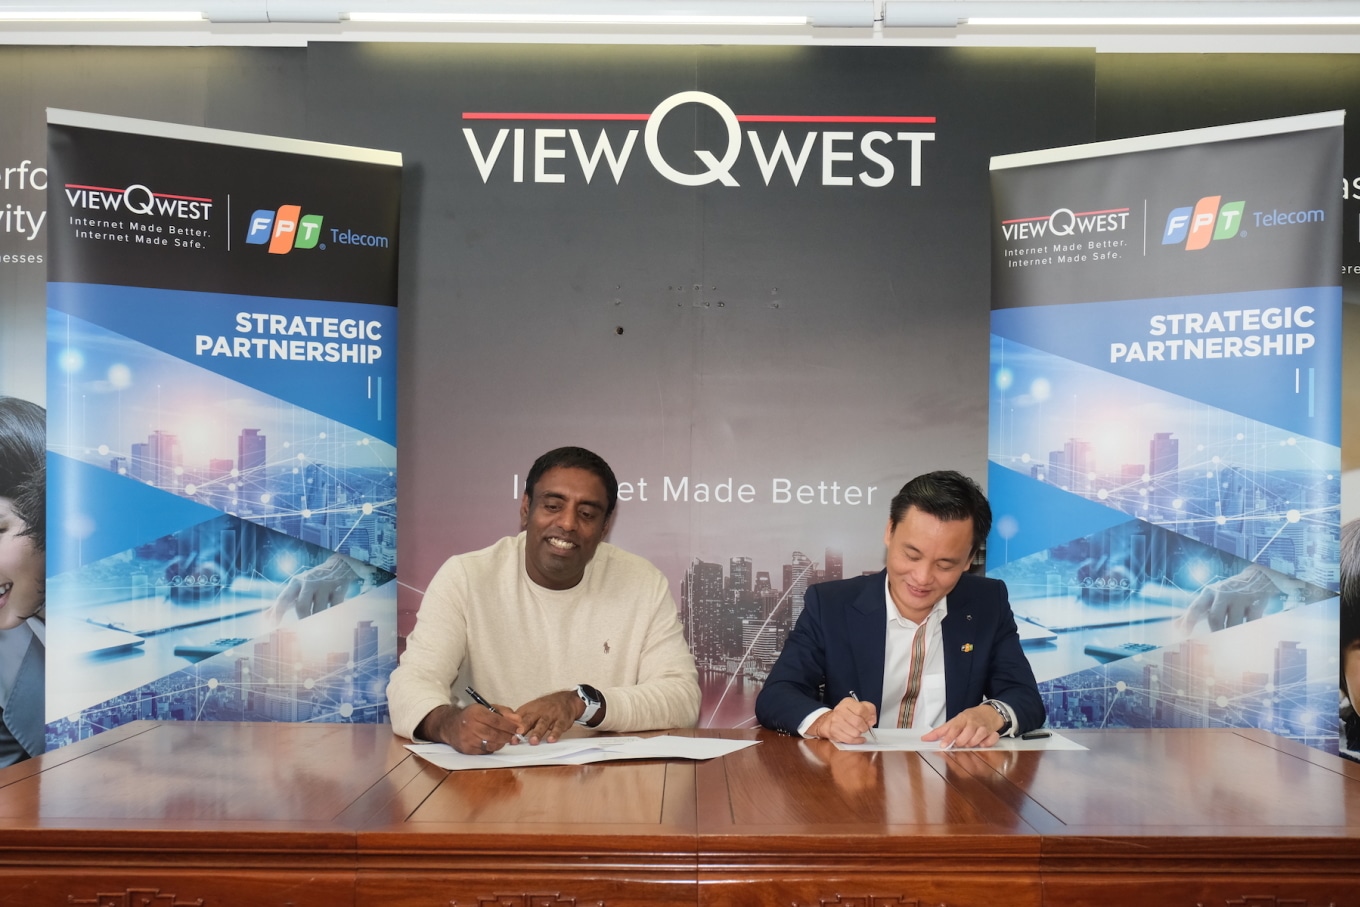 Vignesa Moorthy, Chief Executive Officer of ViewQwest.